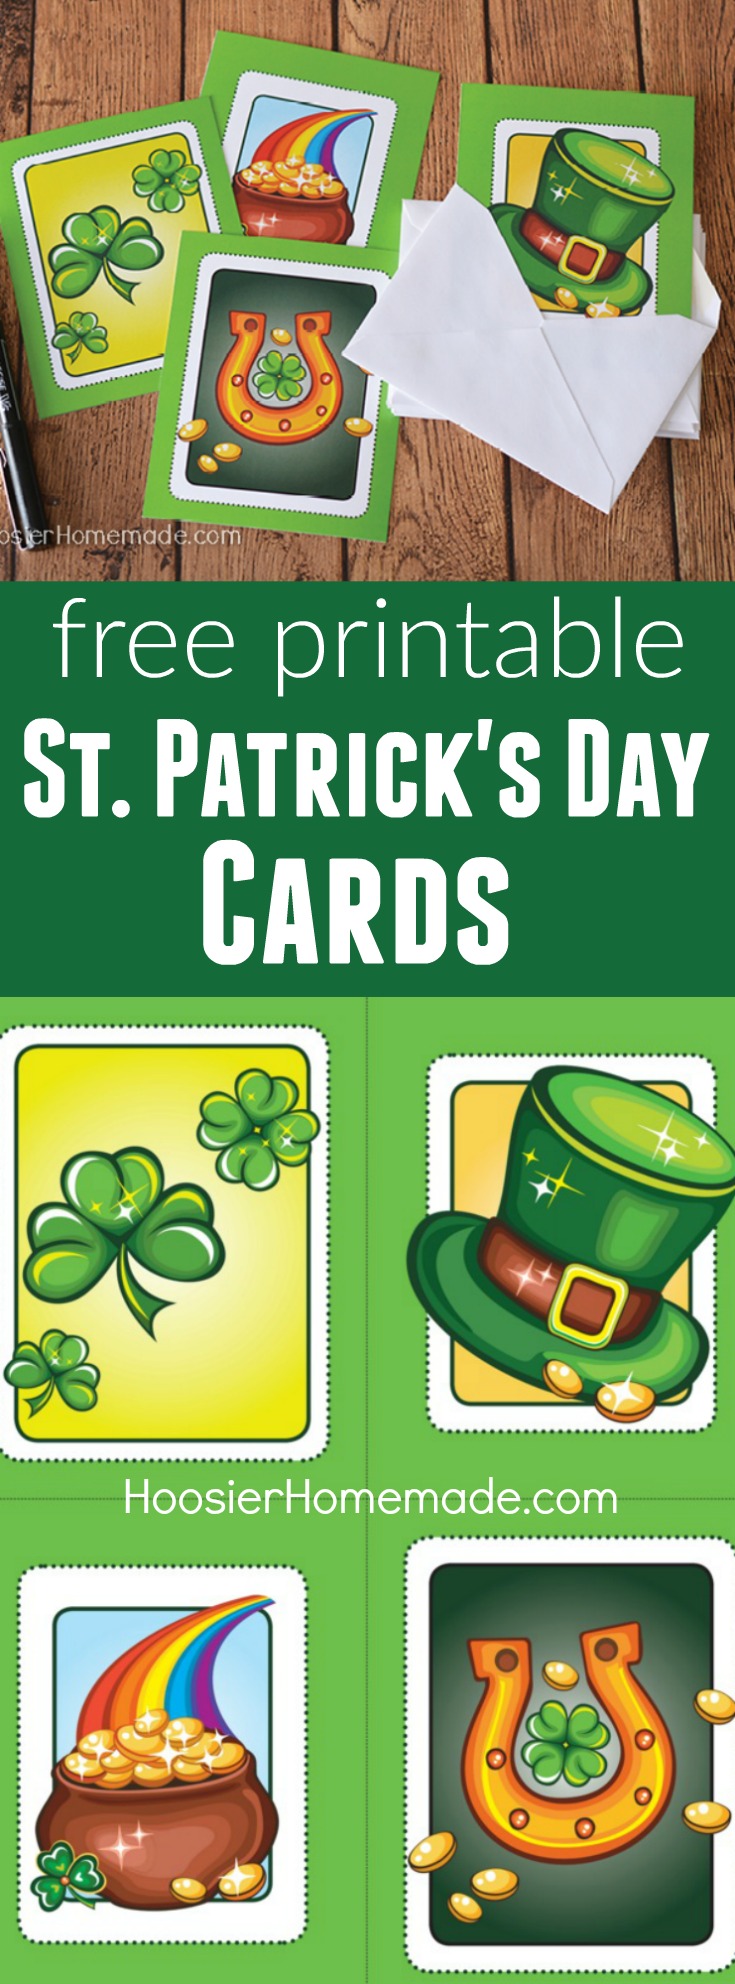 Grab these FREE Printable St. Patrick's Day Cards and spread the fun! Be "GREEN" for a day! Perfect to add to a gift or drop in the mail!